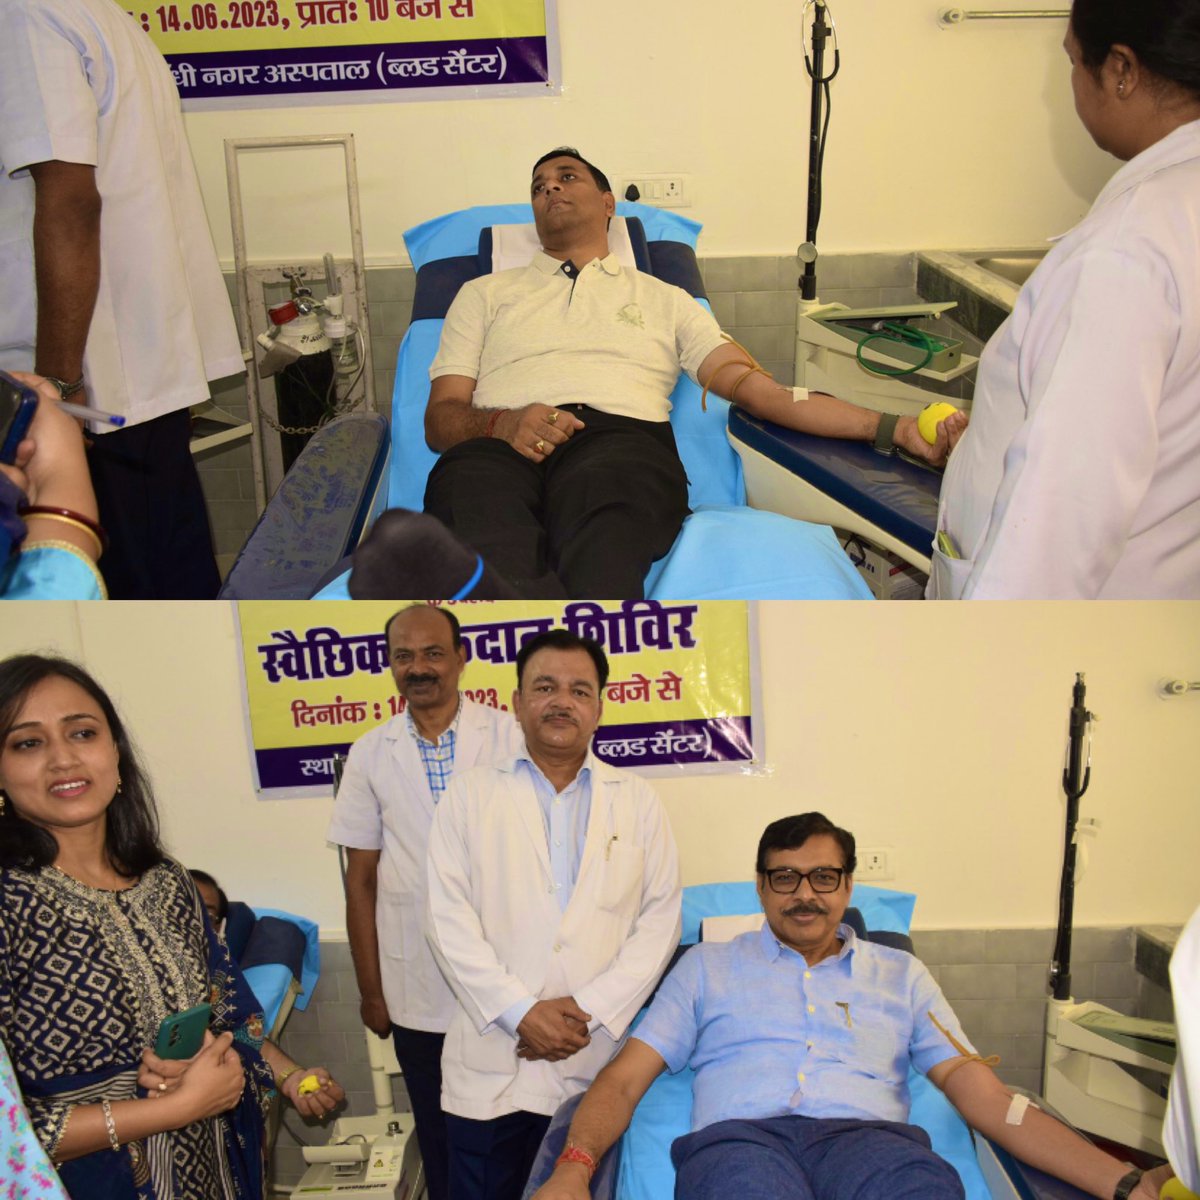 #TeamCCL celebrated #WorldBloodDonorDay by organising a Blood Donation Camp. 

Shri P.M. Prasad, CMD, CCL, Shri Kishore Kaushal, IPS, SSP Ranchi, FD’s, CVO with their families and others donated blood on the occasion.
 
In total, 40 units of blood were collected.#Donateblood